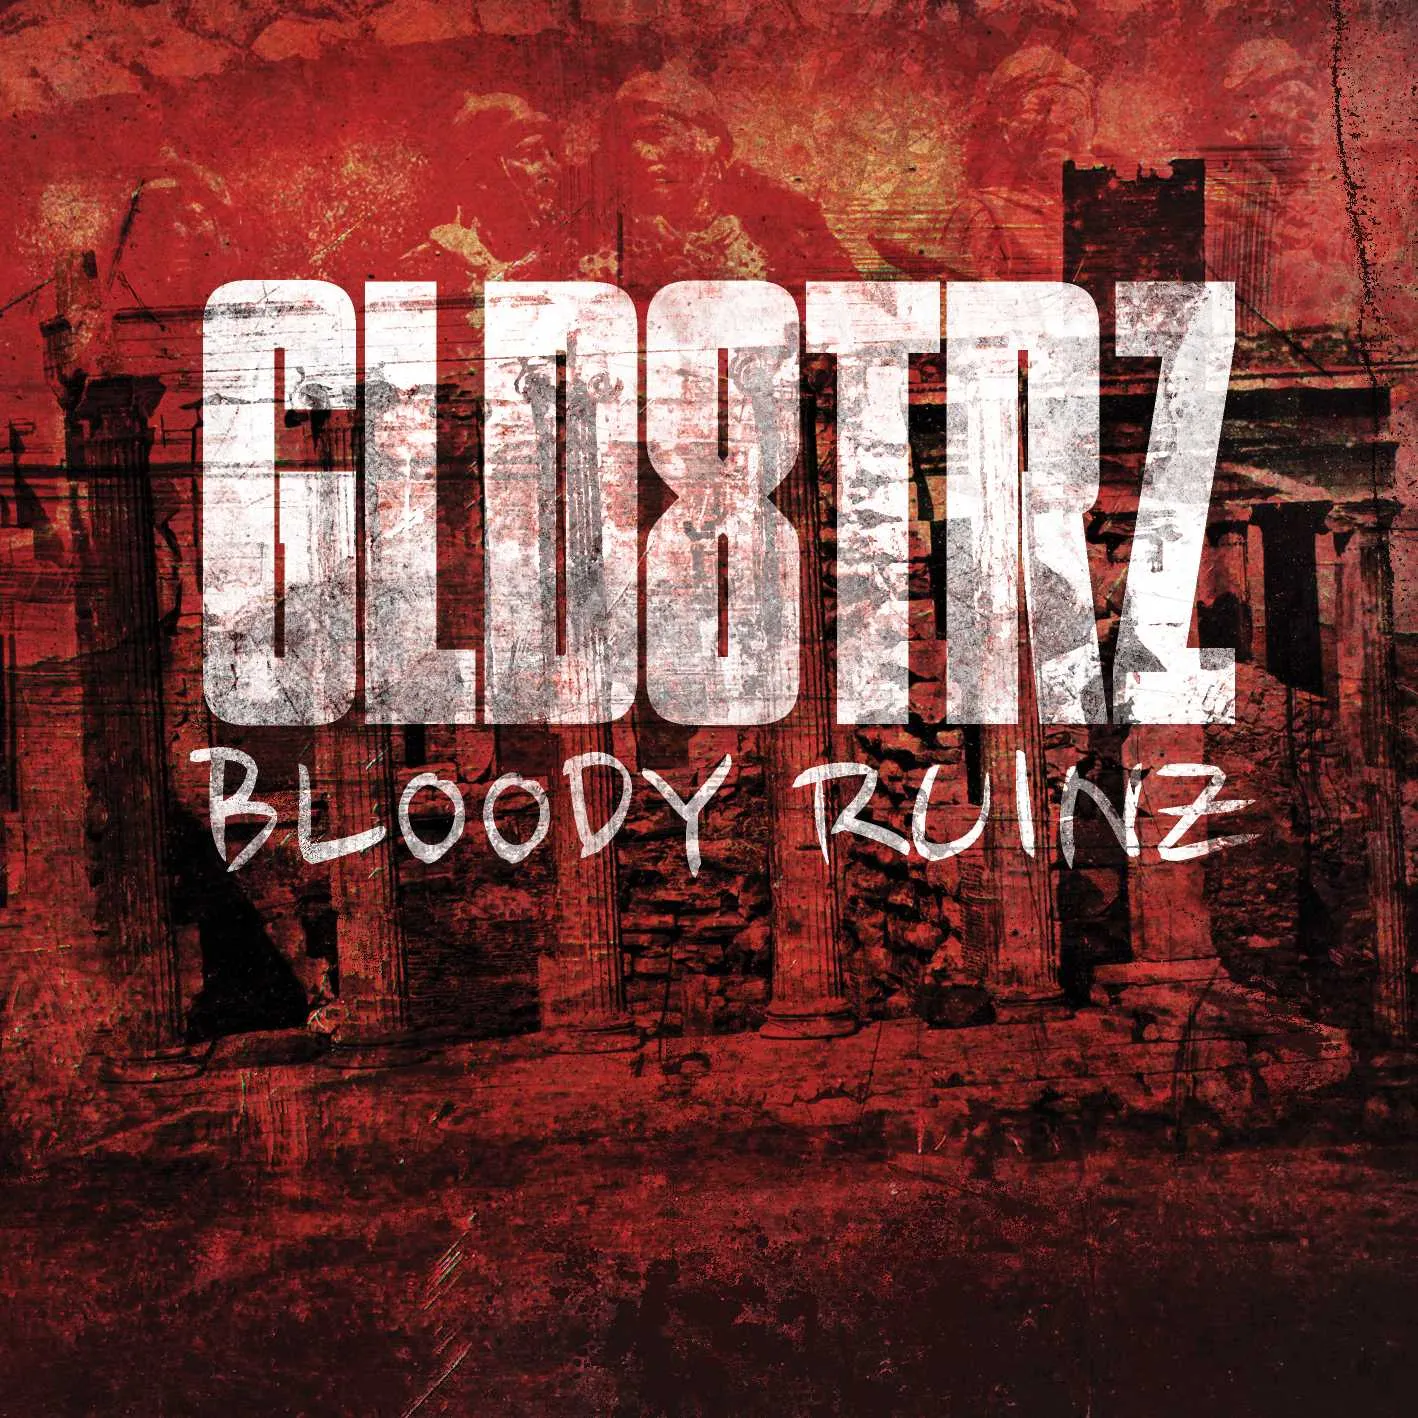 Album cover for “Bloody Ruinz” by GLD8TRZ